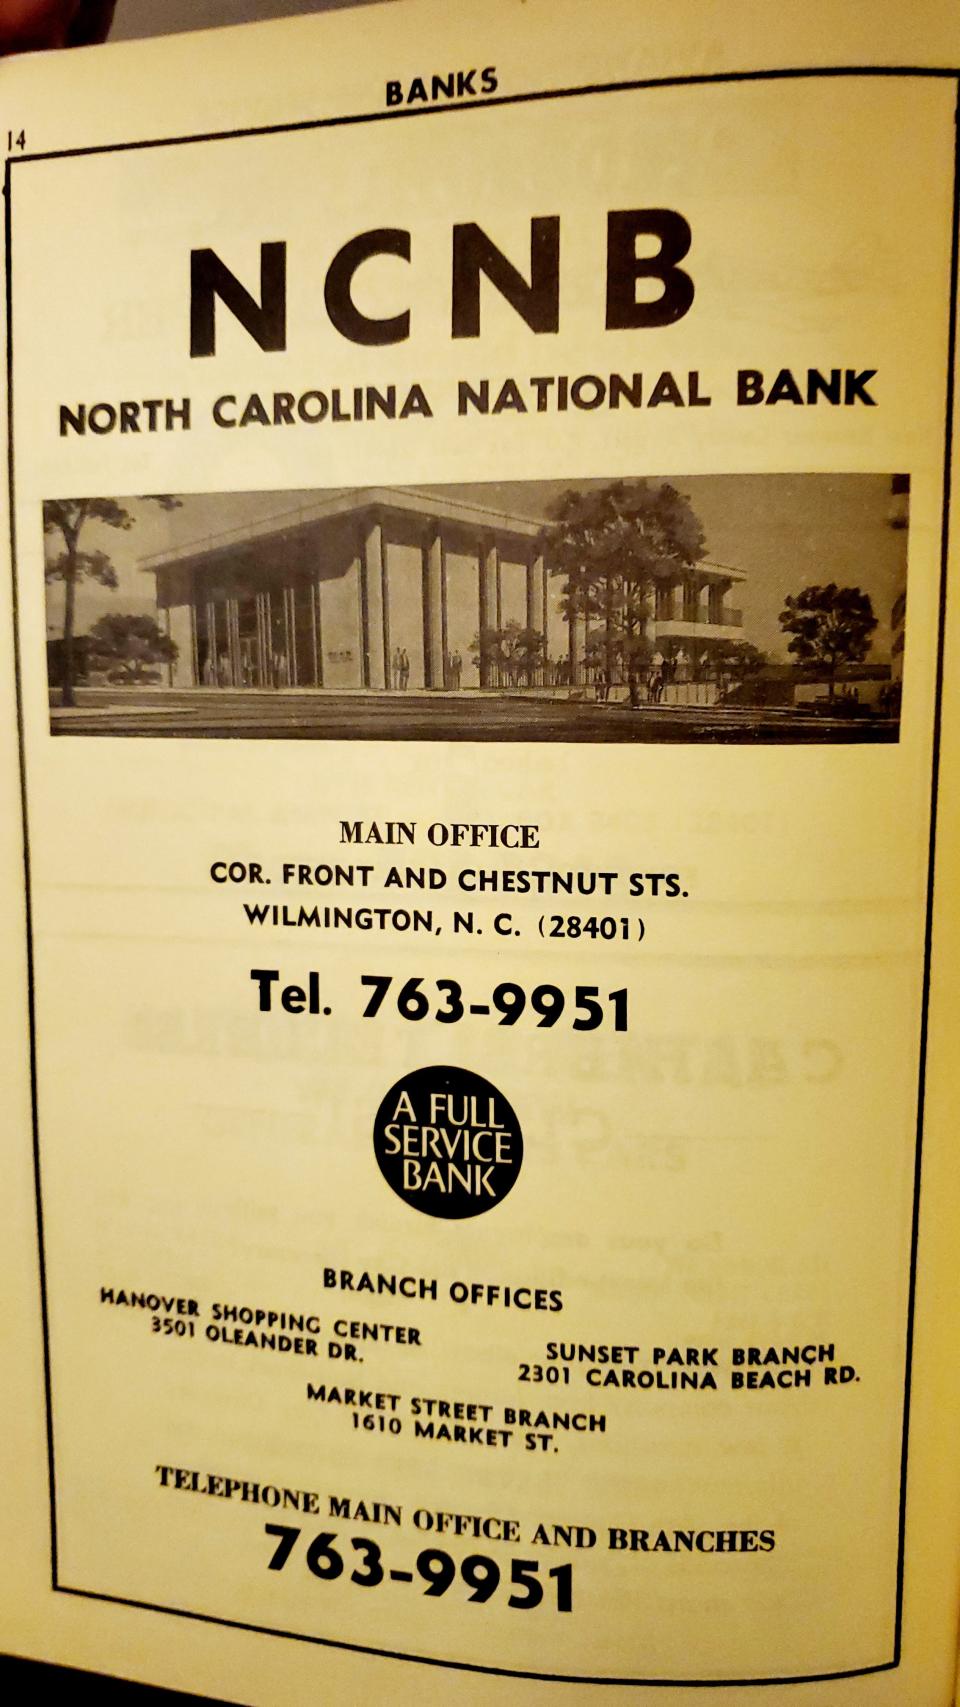 You've probably seen this building in downtown Wilmington, which has been without a tenant for years. In 1971 it was the North Carolina National Bank.